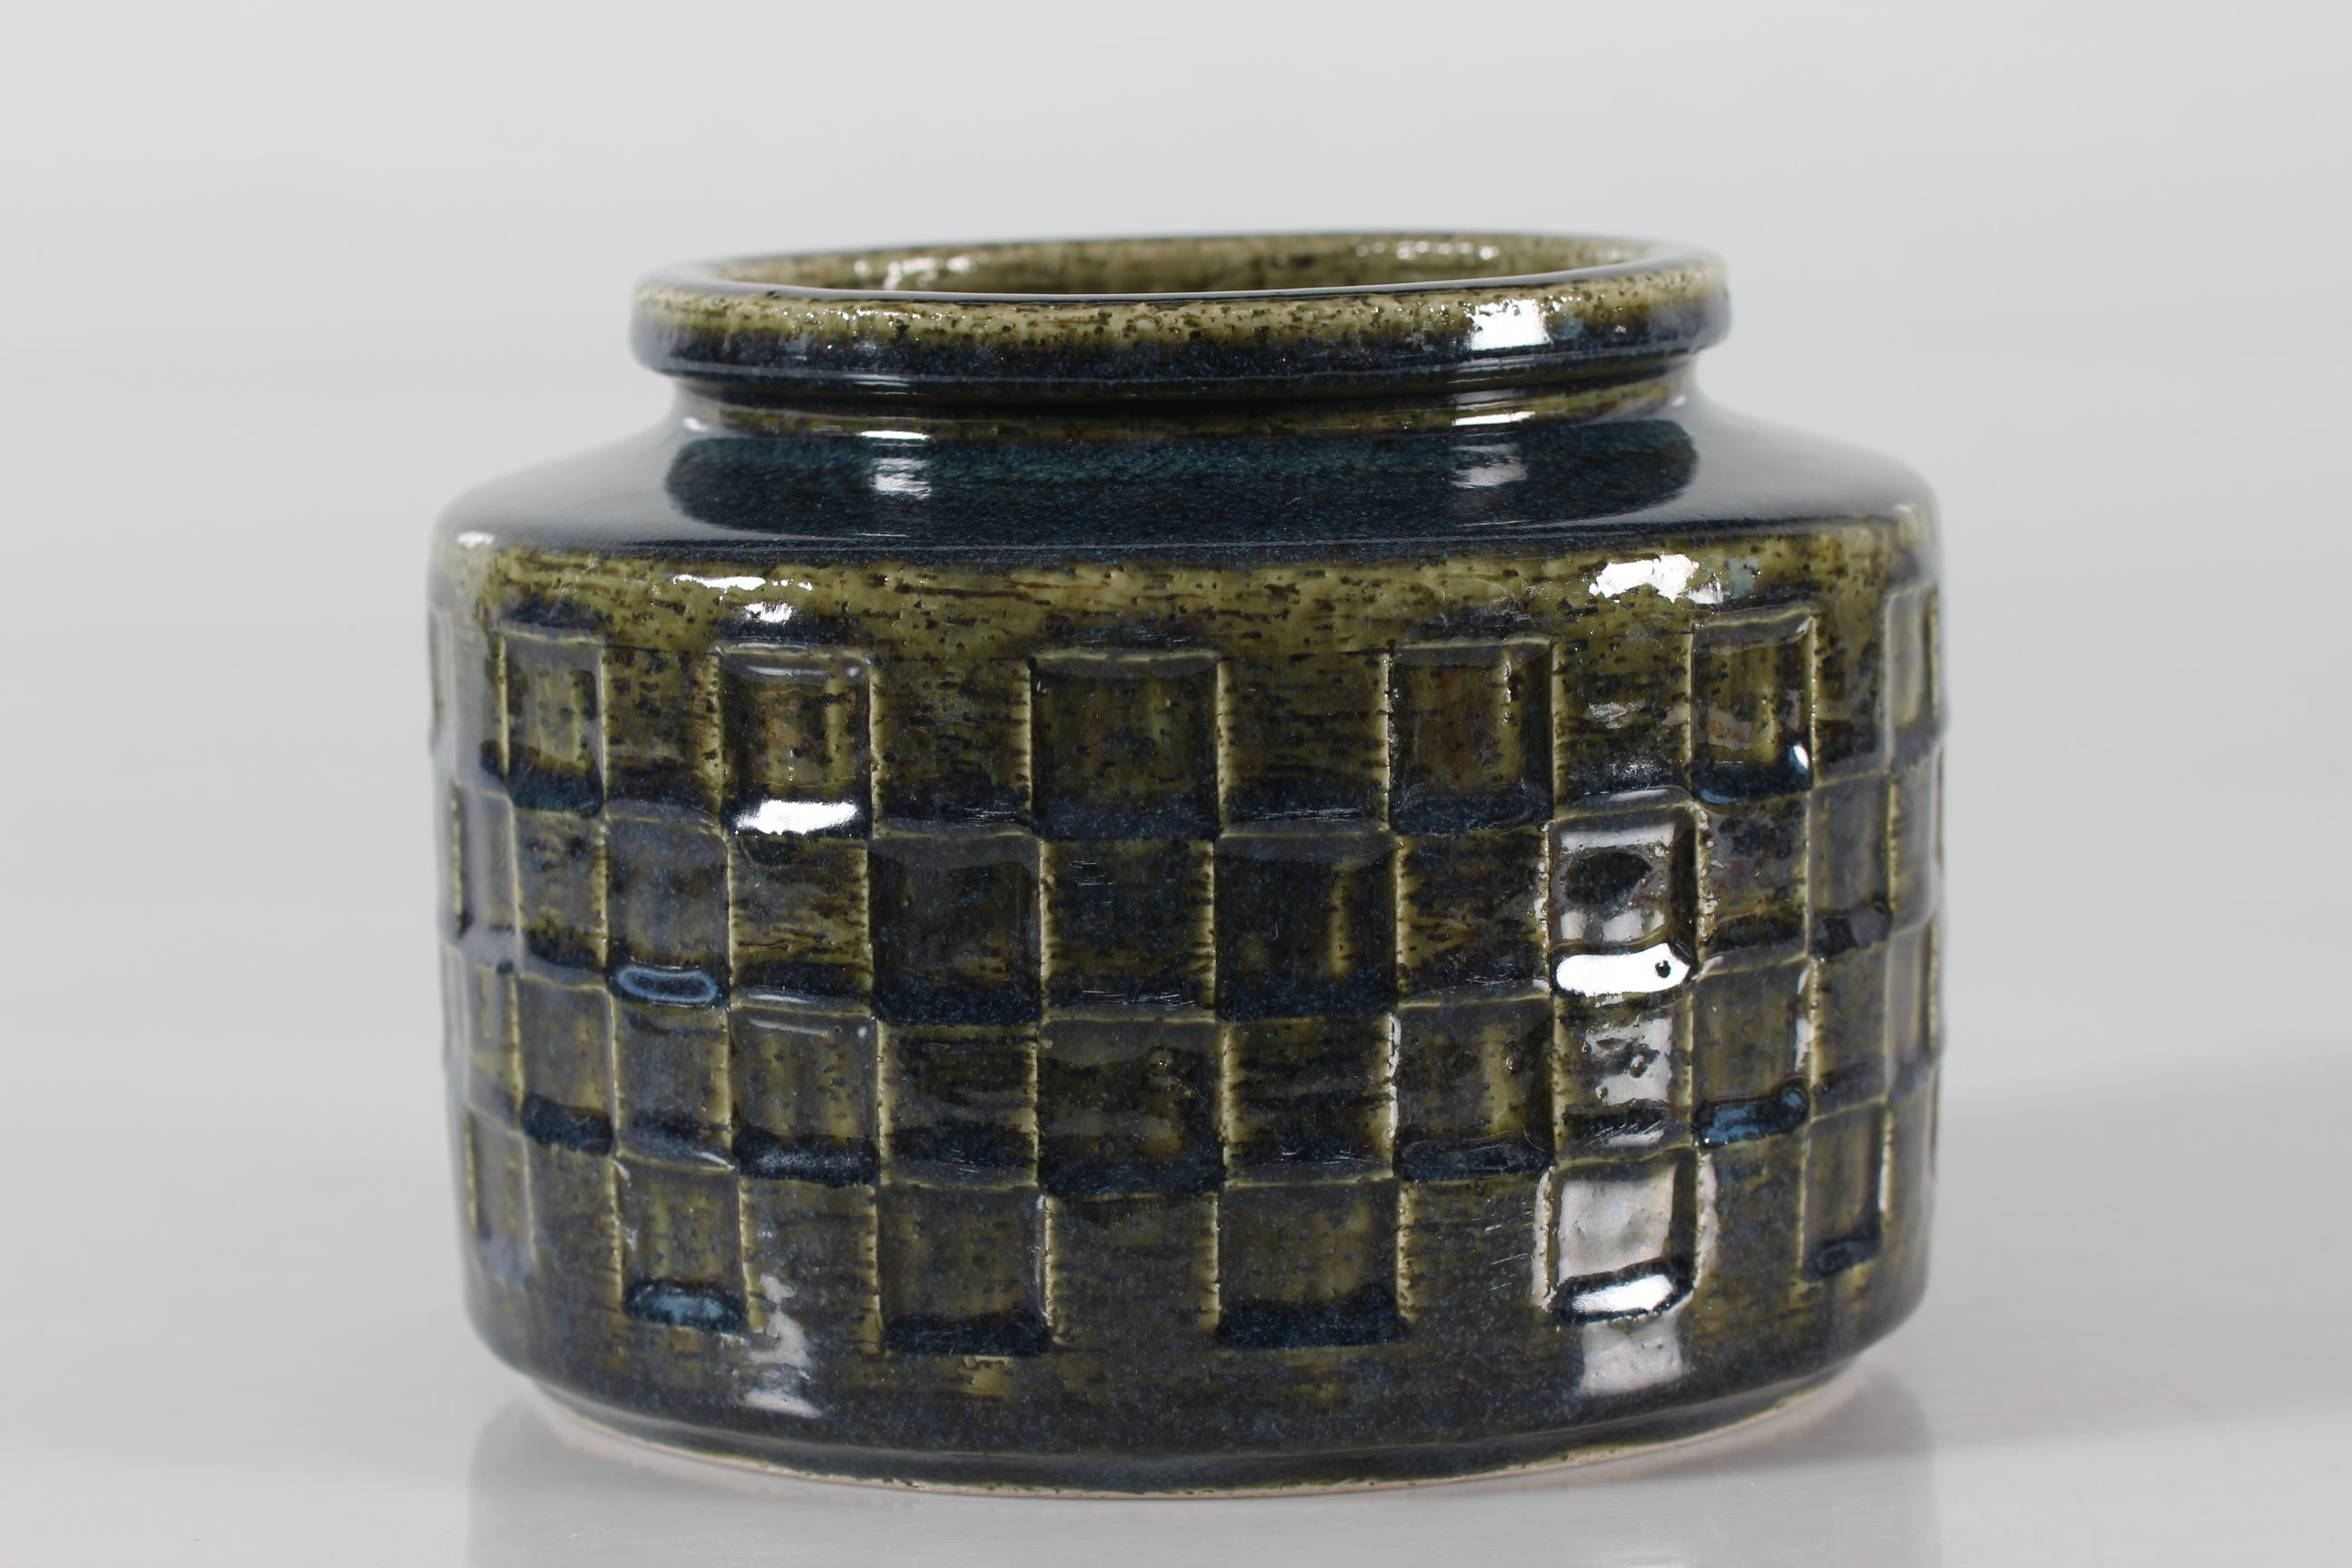 Ceramic vase by Per Linnemann-Schmidt for Palshus Denmark model no. C 19. Made in the 1960s.
It is made of chamotte stoneware clay which gives a rough and vivid surface. It has a glossy bottle green glaze with blue accents over a textured geometric